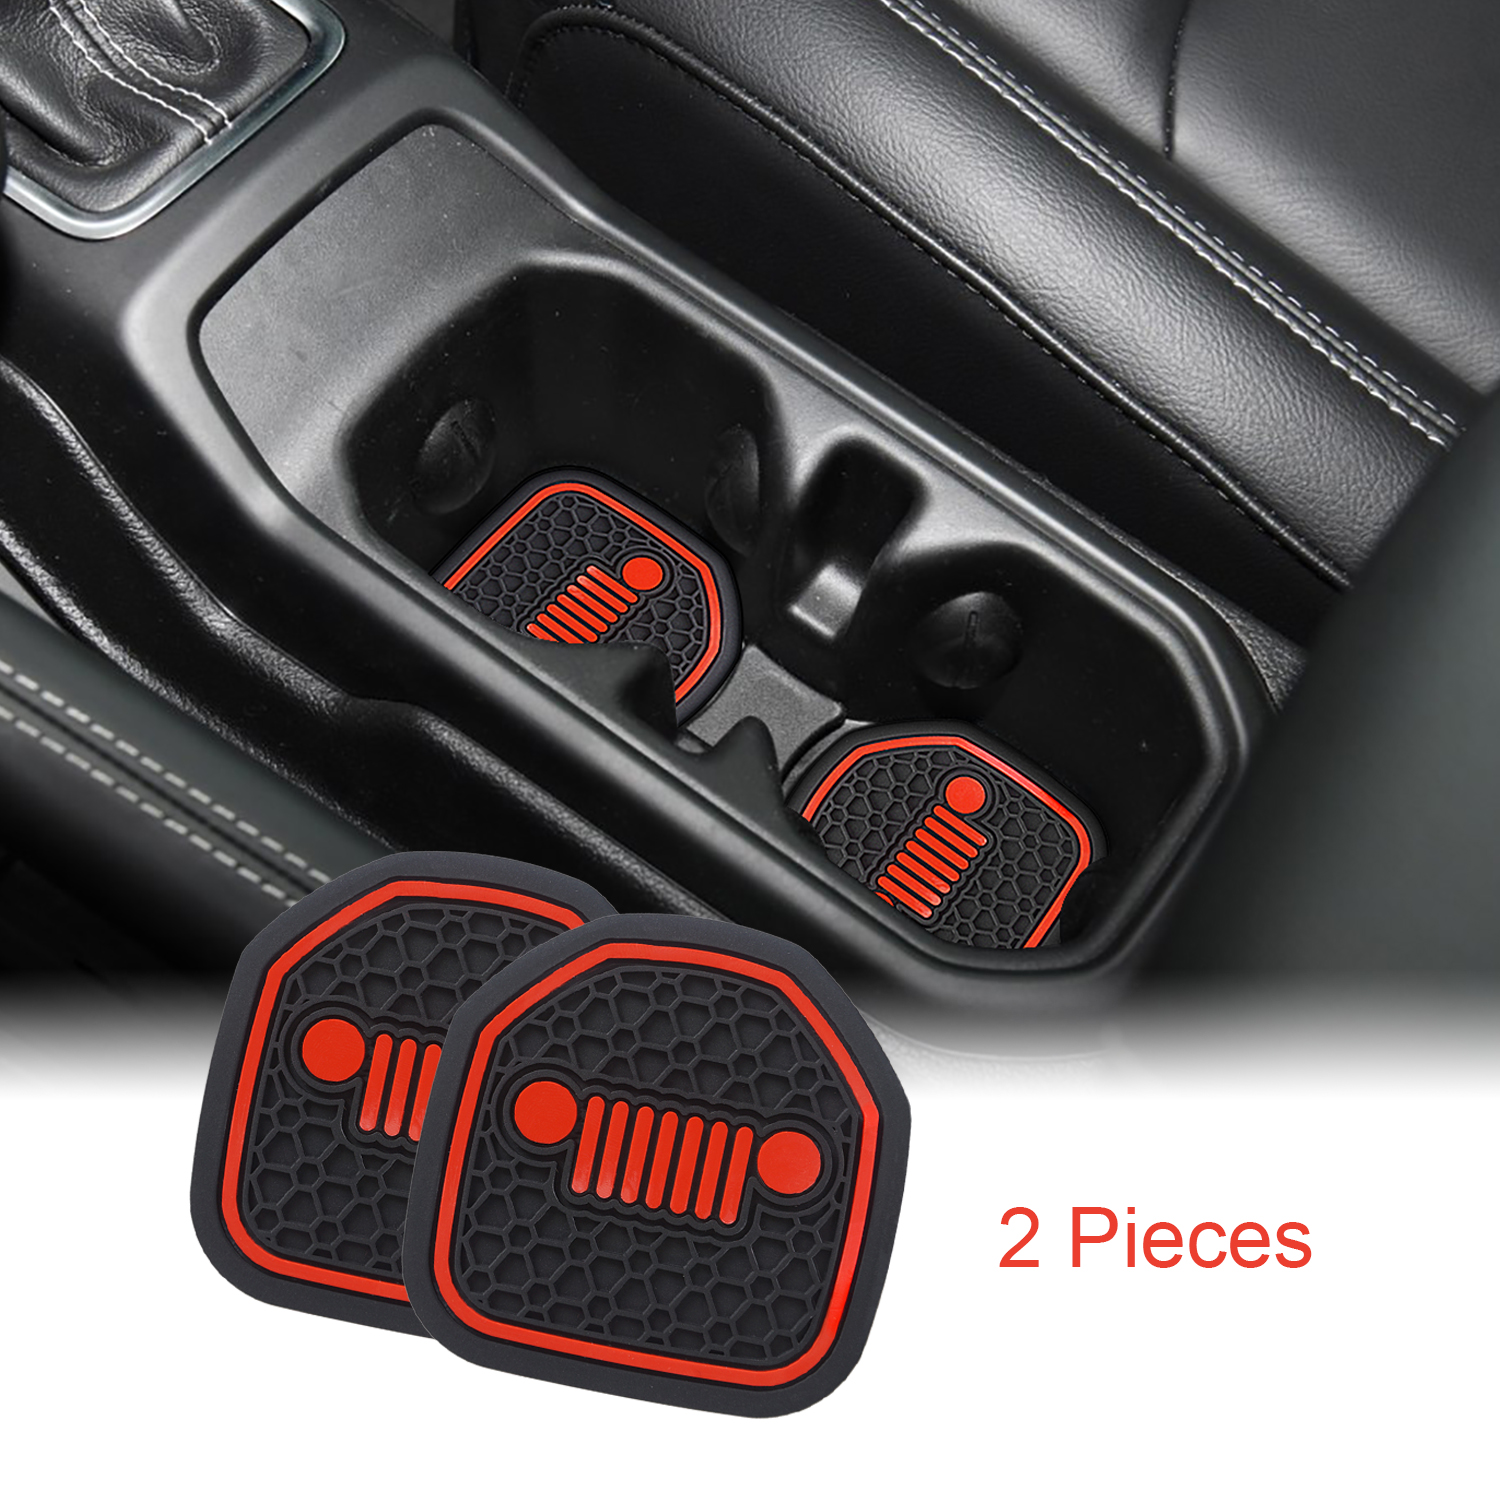 4 Pcs Kit Blue Auovo Auto Cup Holder Inserts Coaster Fit for 2018-2021 Wrangler JL JLU 2020-2021 Gladiator Accessories JT Cup Mat Pad Interior Decoration 